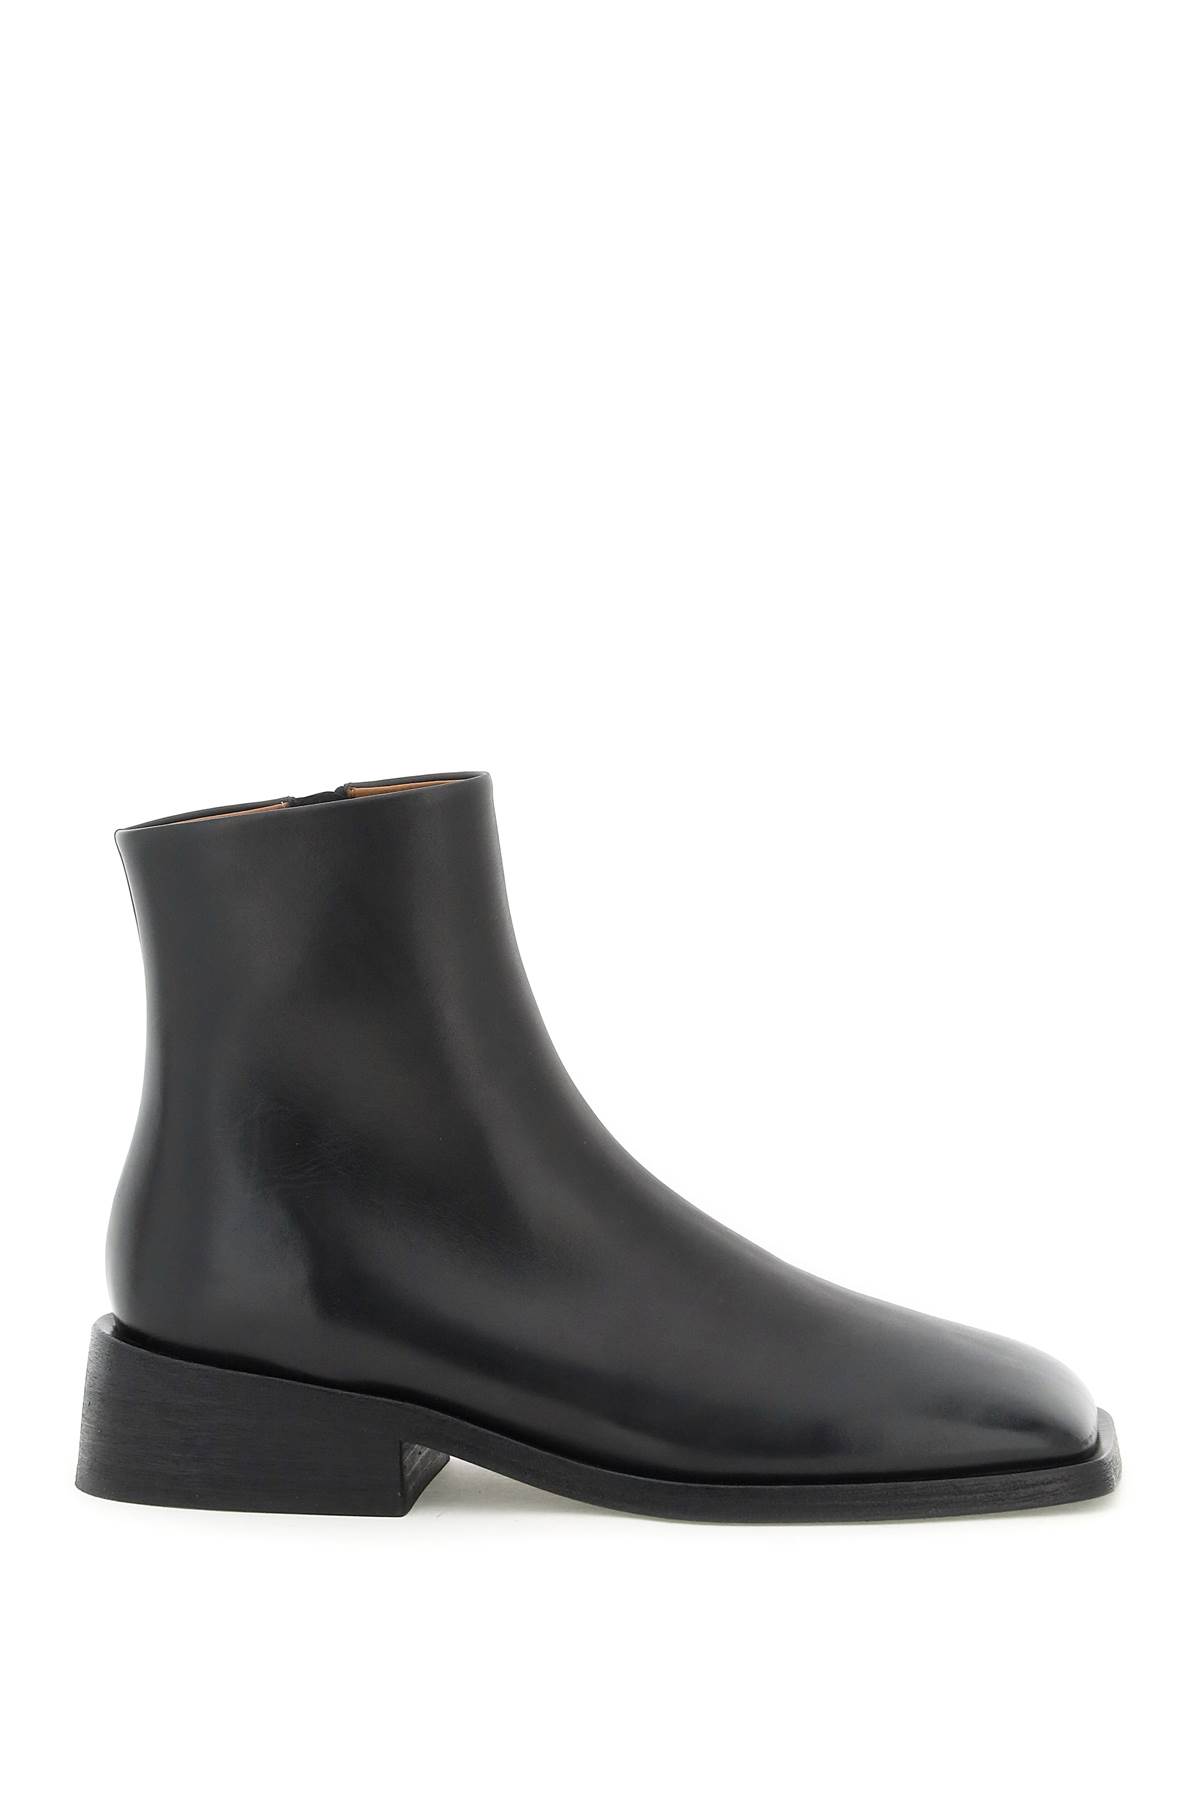 Marsell spatoletto Leather Ankle Boots